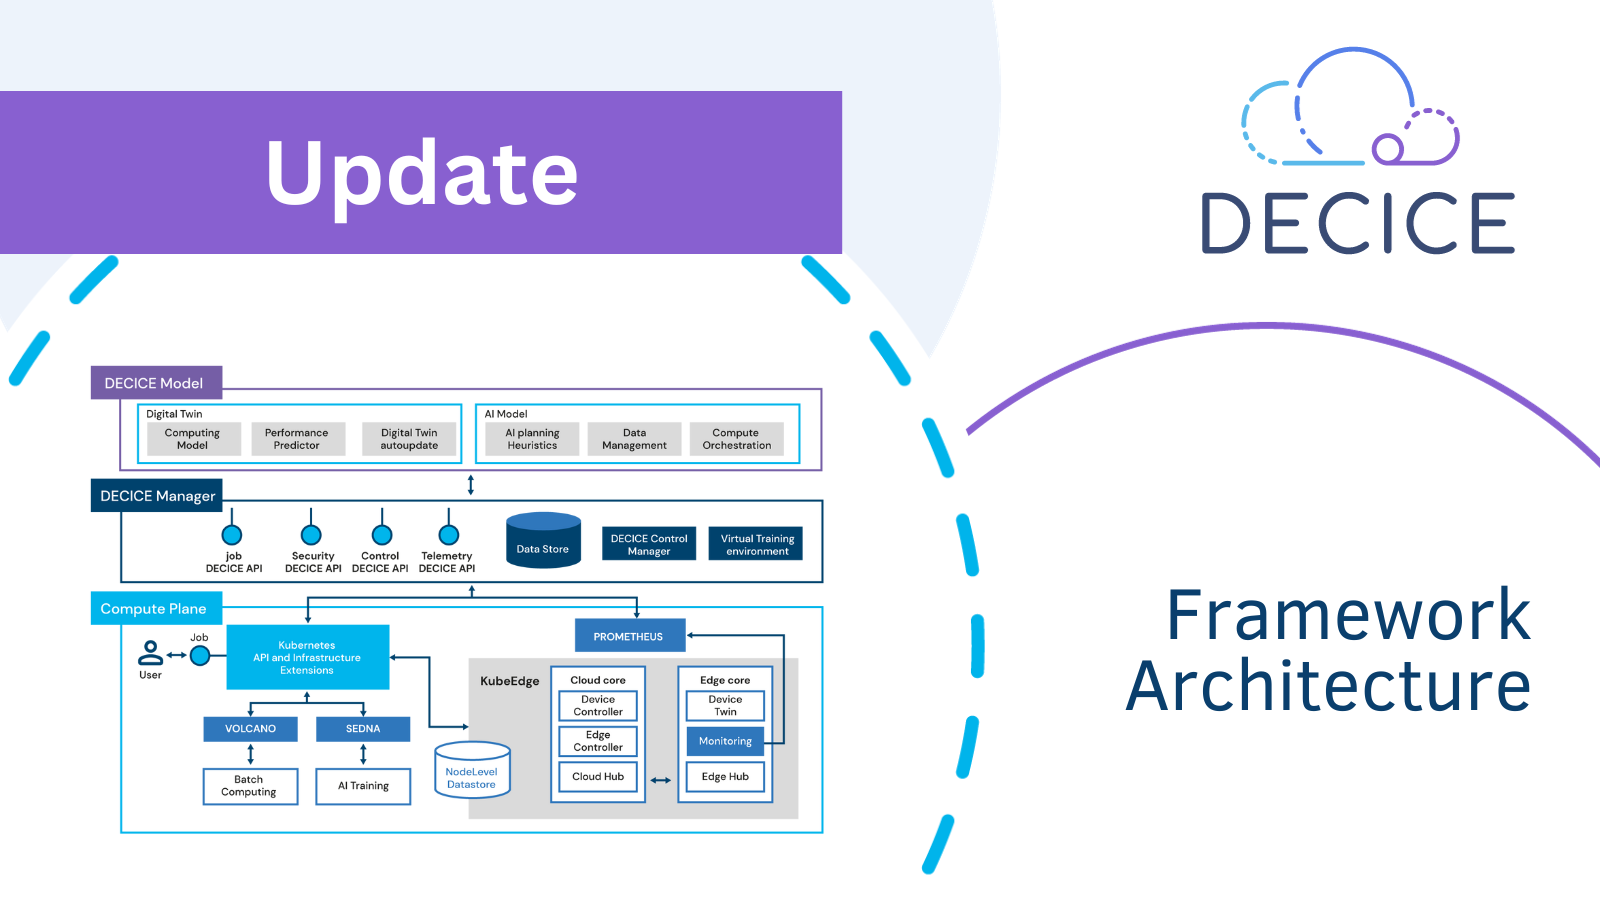 An Update to our DECICE Framework Architecture